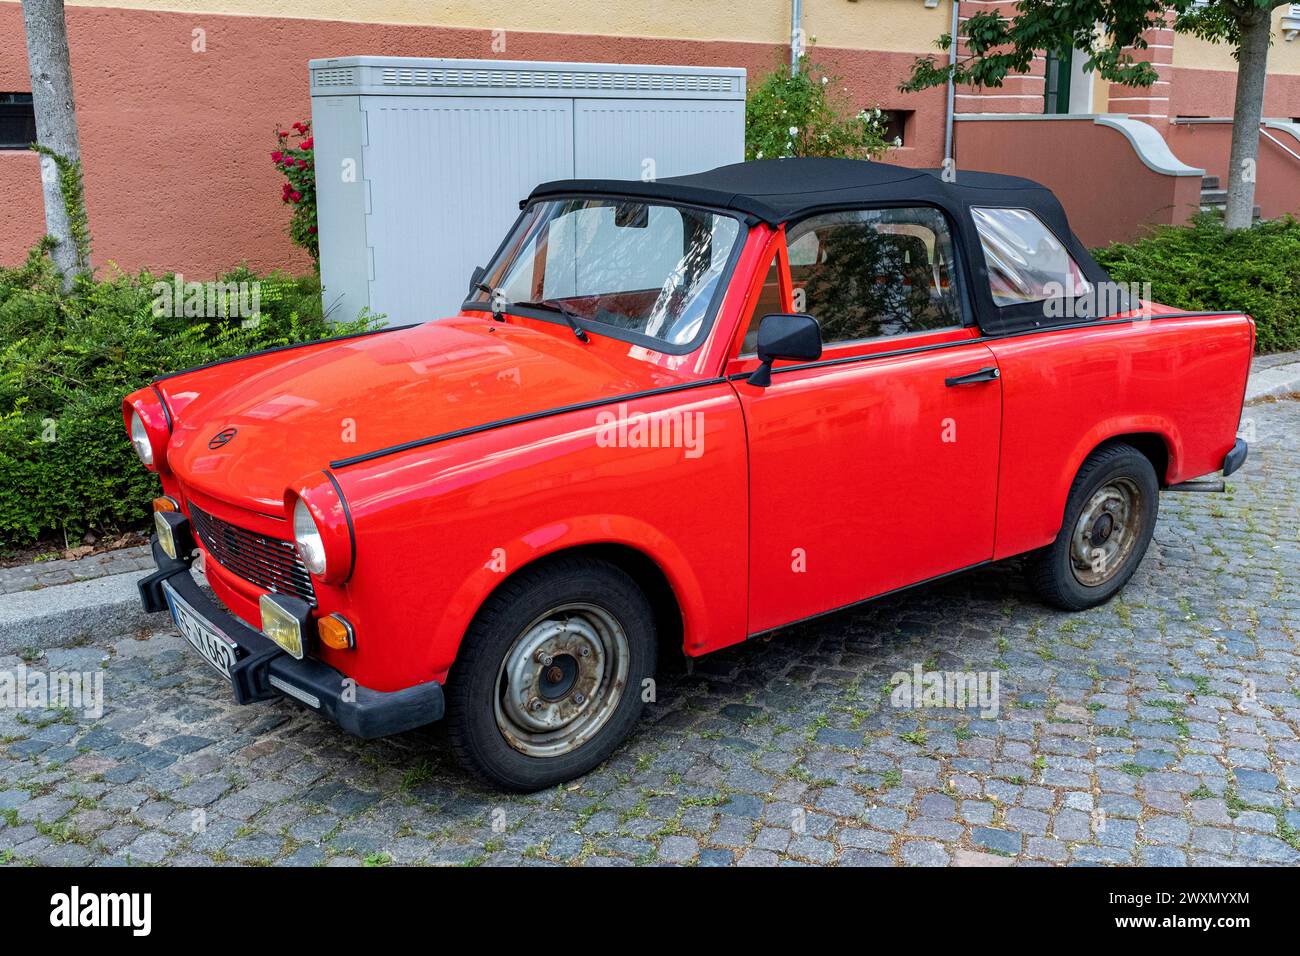 Trabi Cabrio Frankfurt Oder, Germany. Totally refurbished DDR / GDR / East-German Trabi Cabriolet Car with red paint job. Trabi s are now a culture thing. Frankfurt Oder Mitte Brandenburg Germany Copyright: xGuidoxKoppesxPhotox Stock Photo